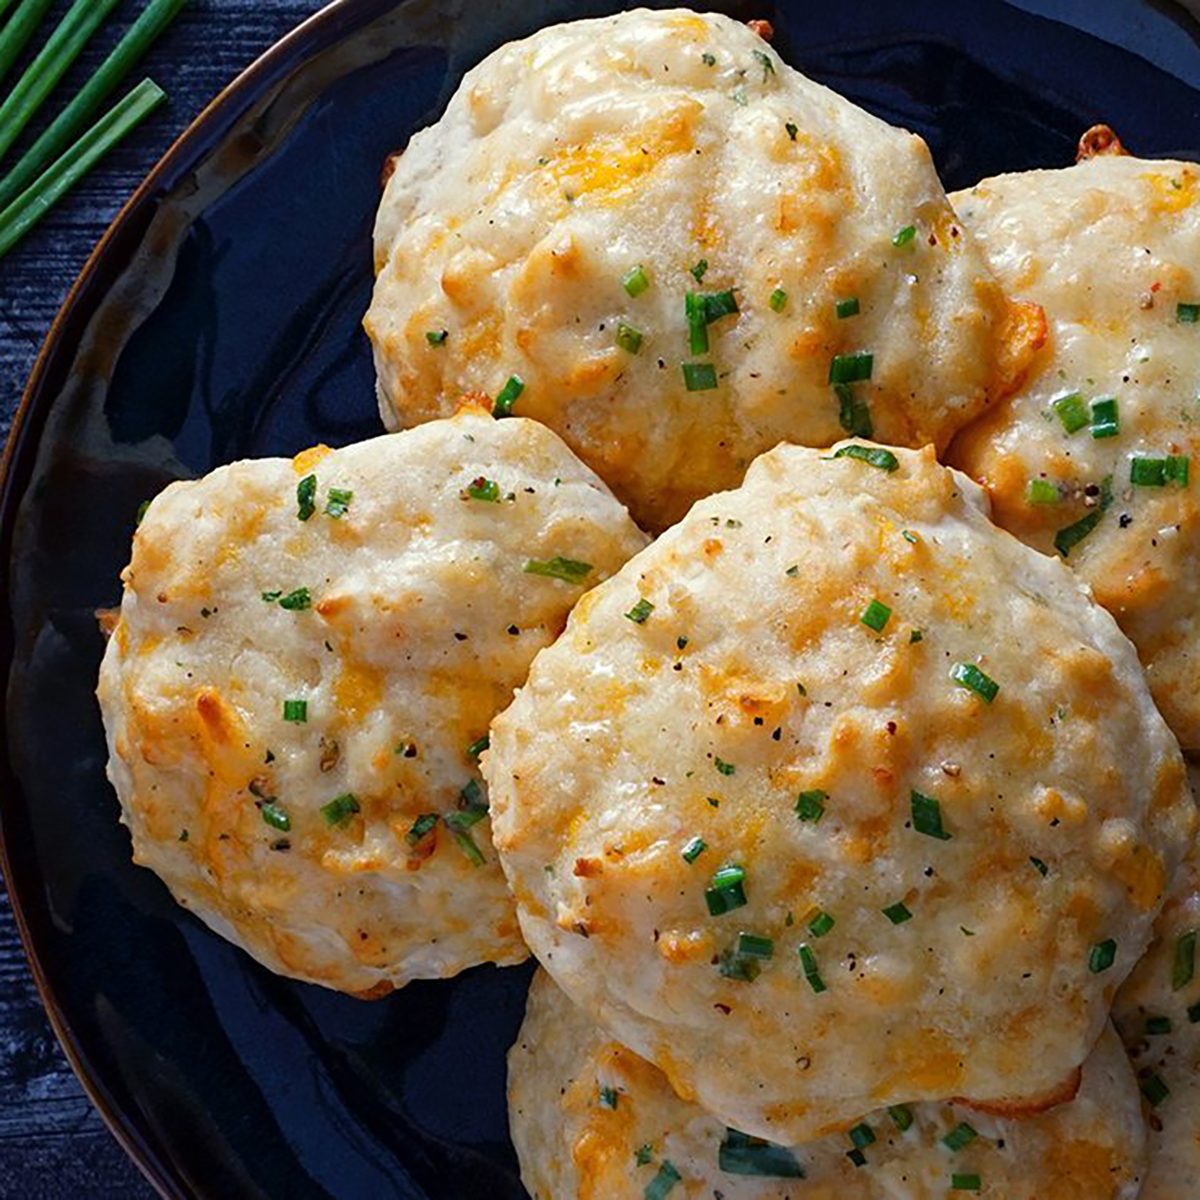 Inspired by: Red Lobster Cheddar Bay Biscuits